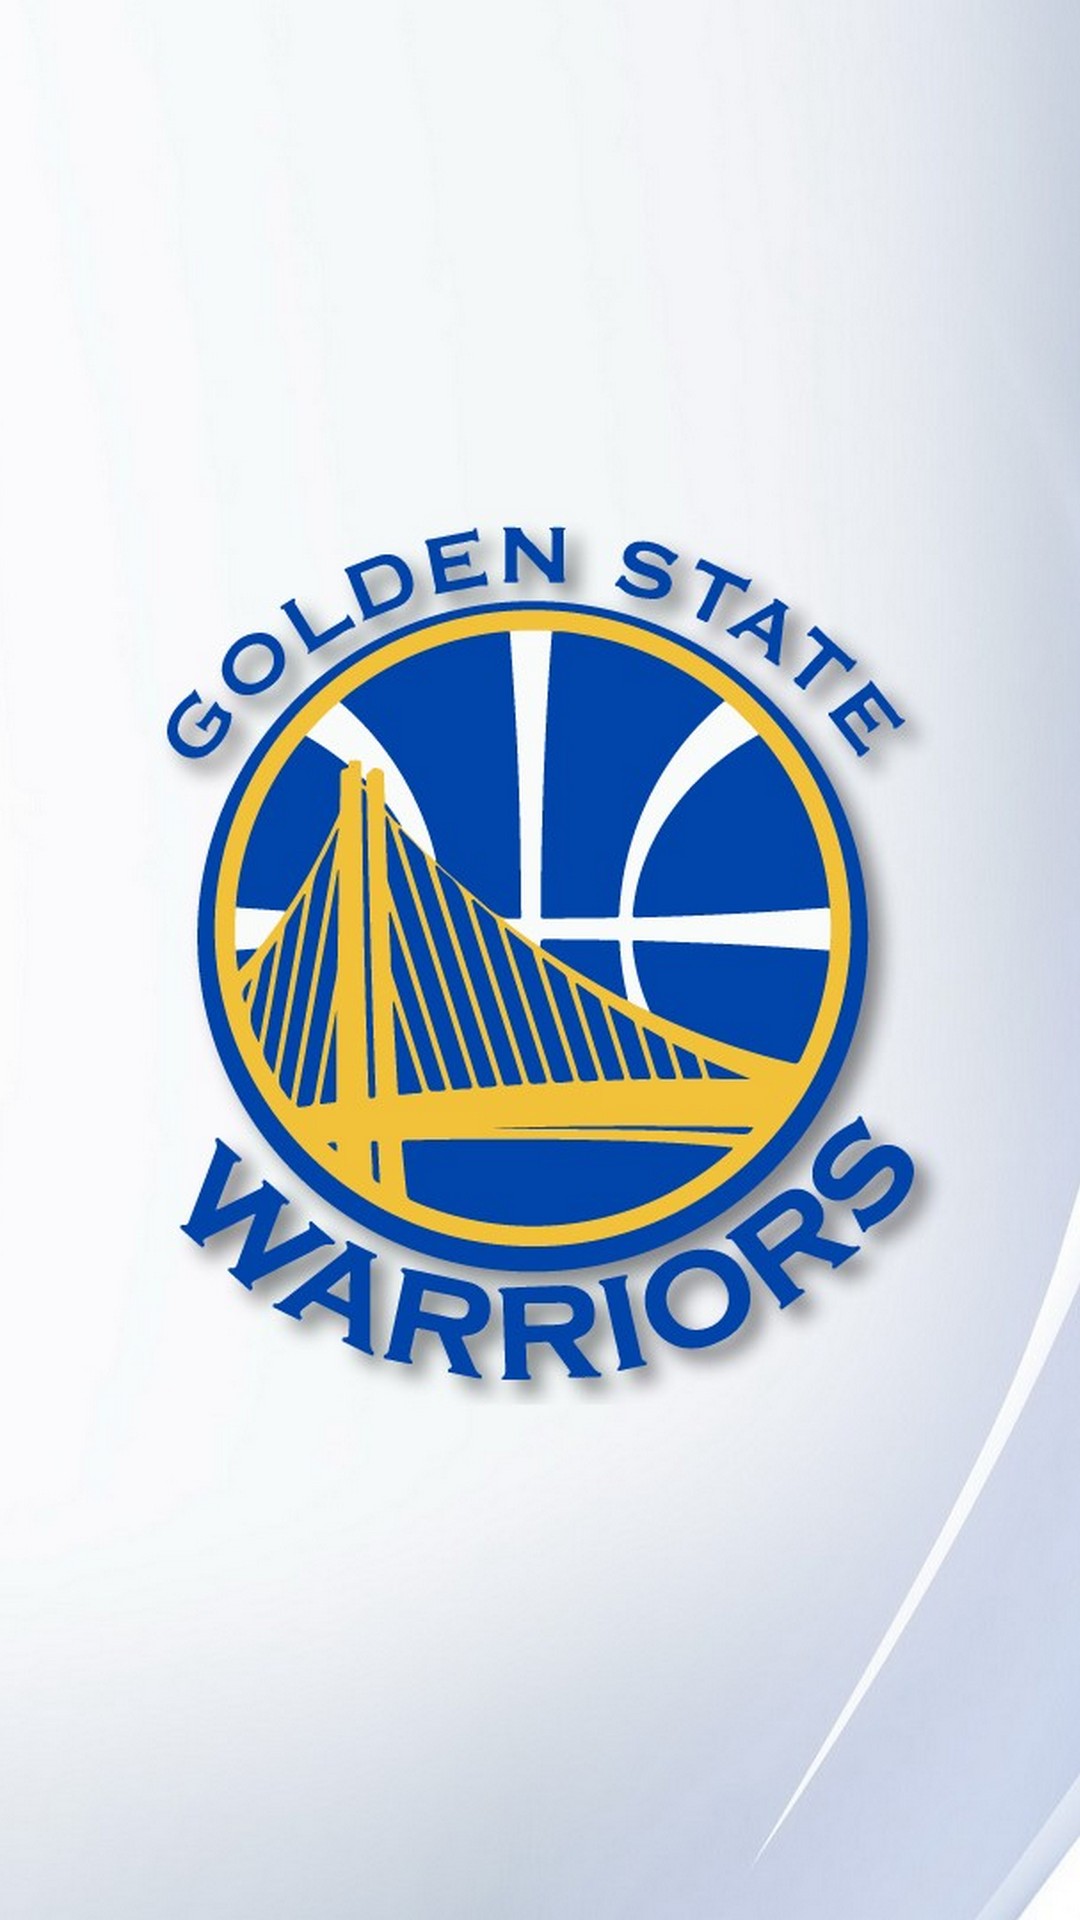 Golden State Warriors Wallpaper For Mobile Android with image resolution 1080x1920 pixel. You can make this wallpaper for your Desktop Computer Backgrounds, Mac Wallpapers, Android Lock screen or iPhone Screensavers